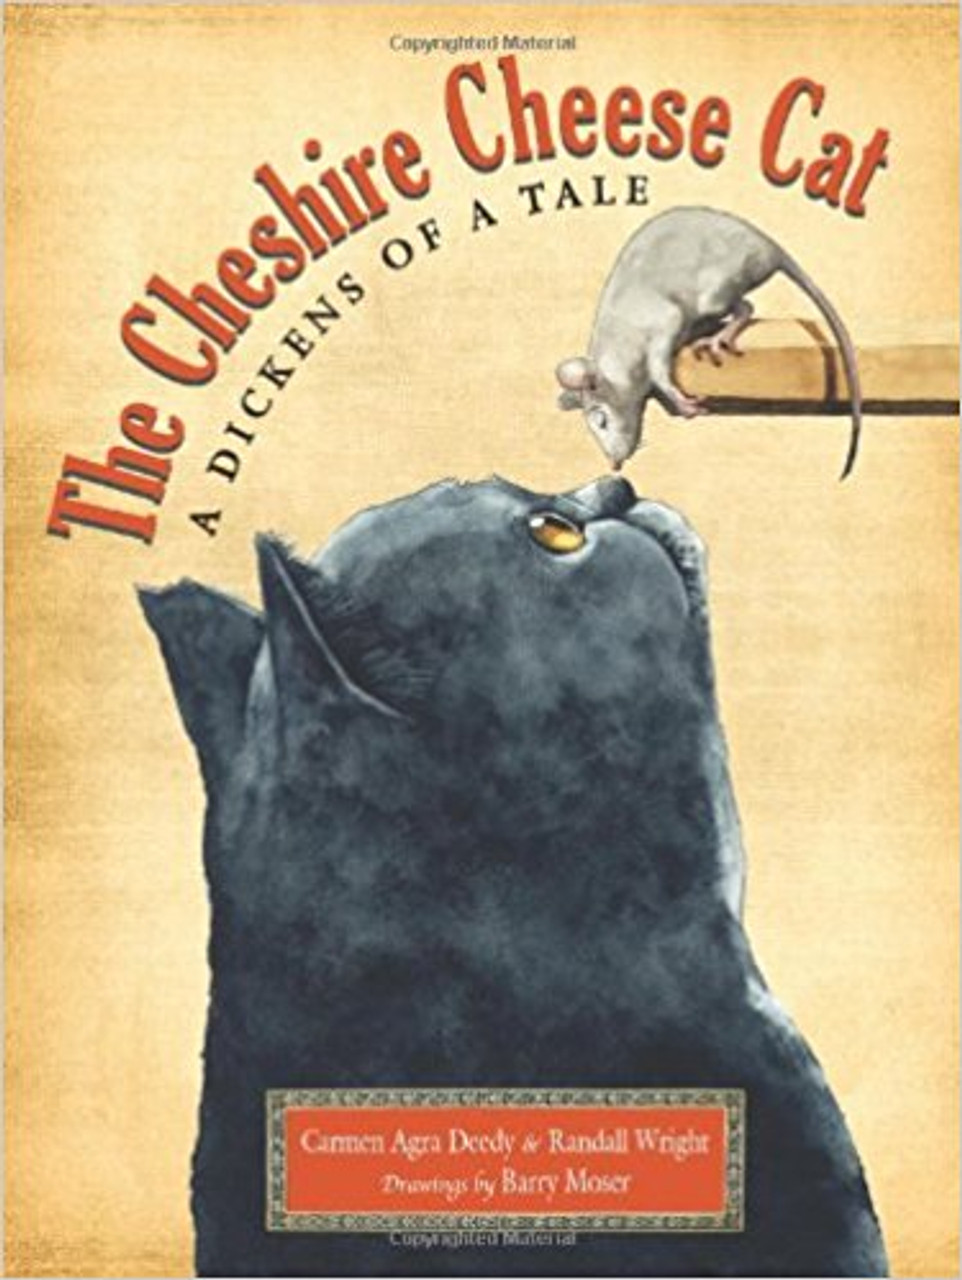 The Cheshire Cheese Cat:  A Dickens of a Tale by Carmen Agra Deedy